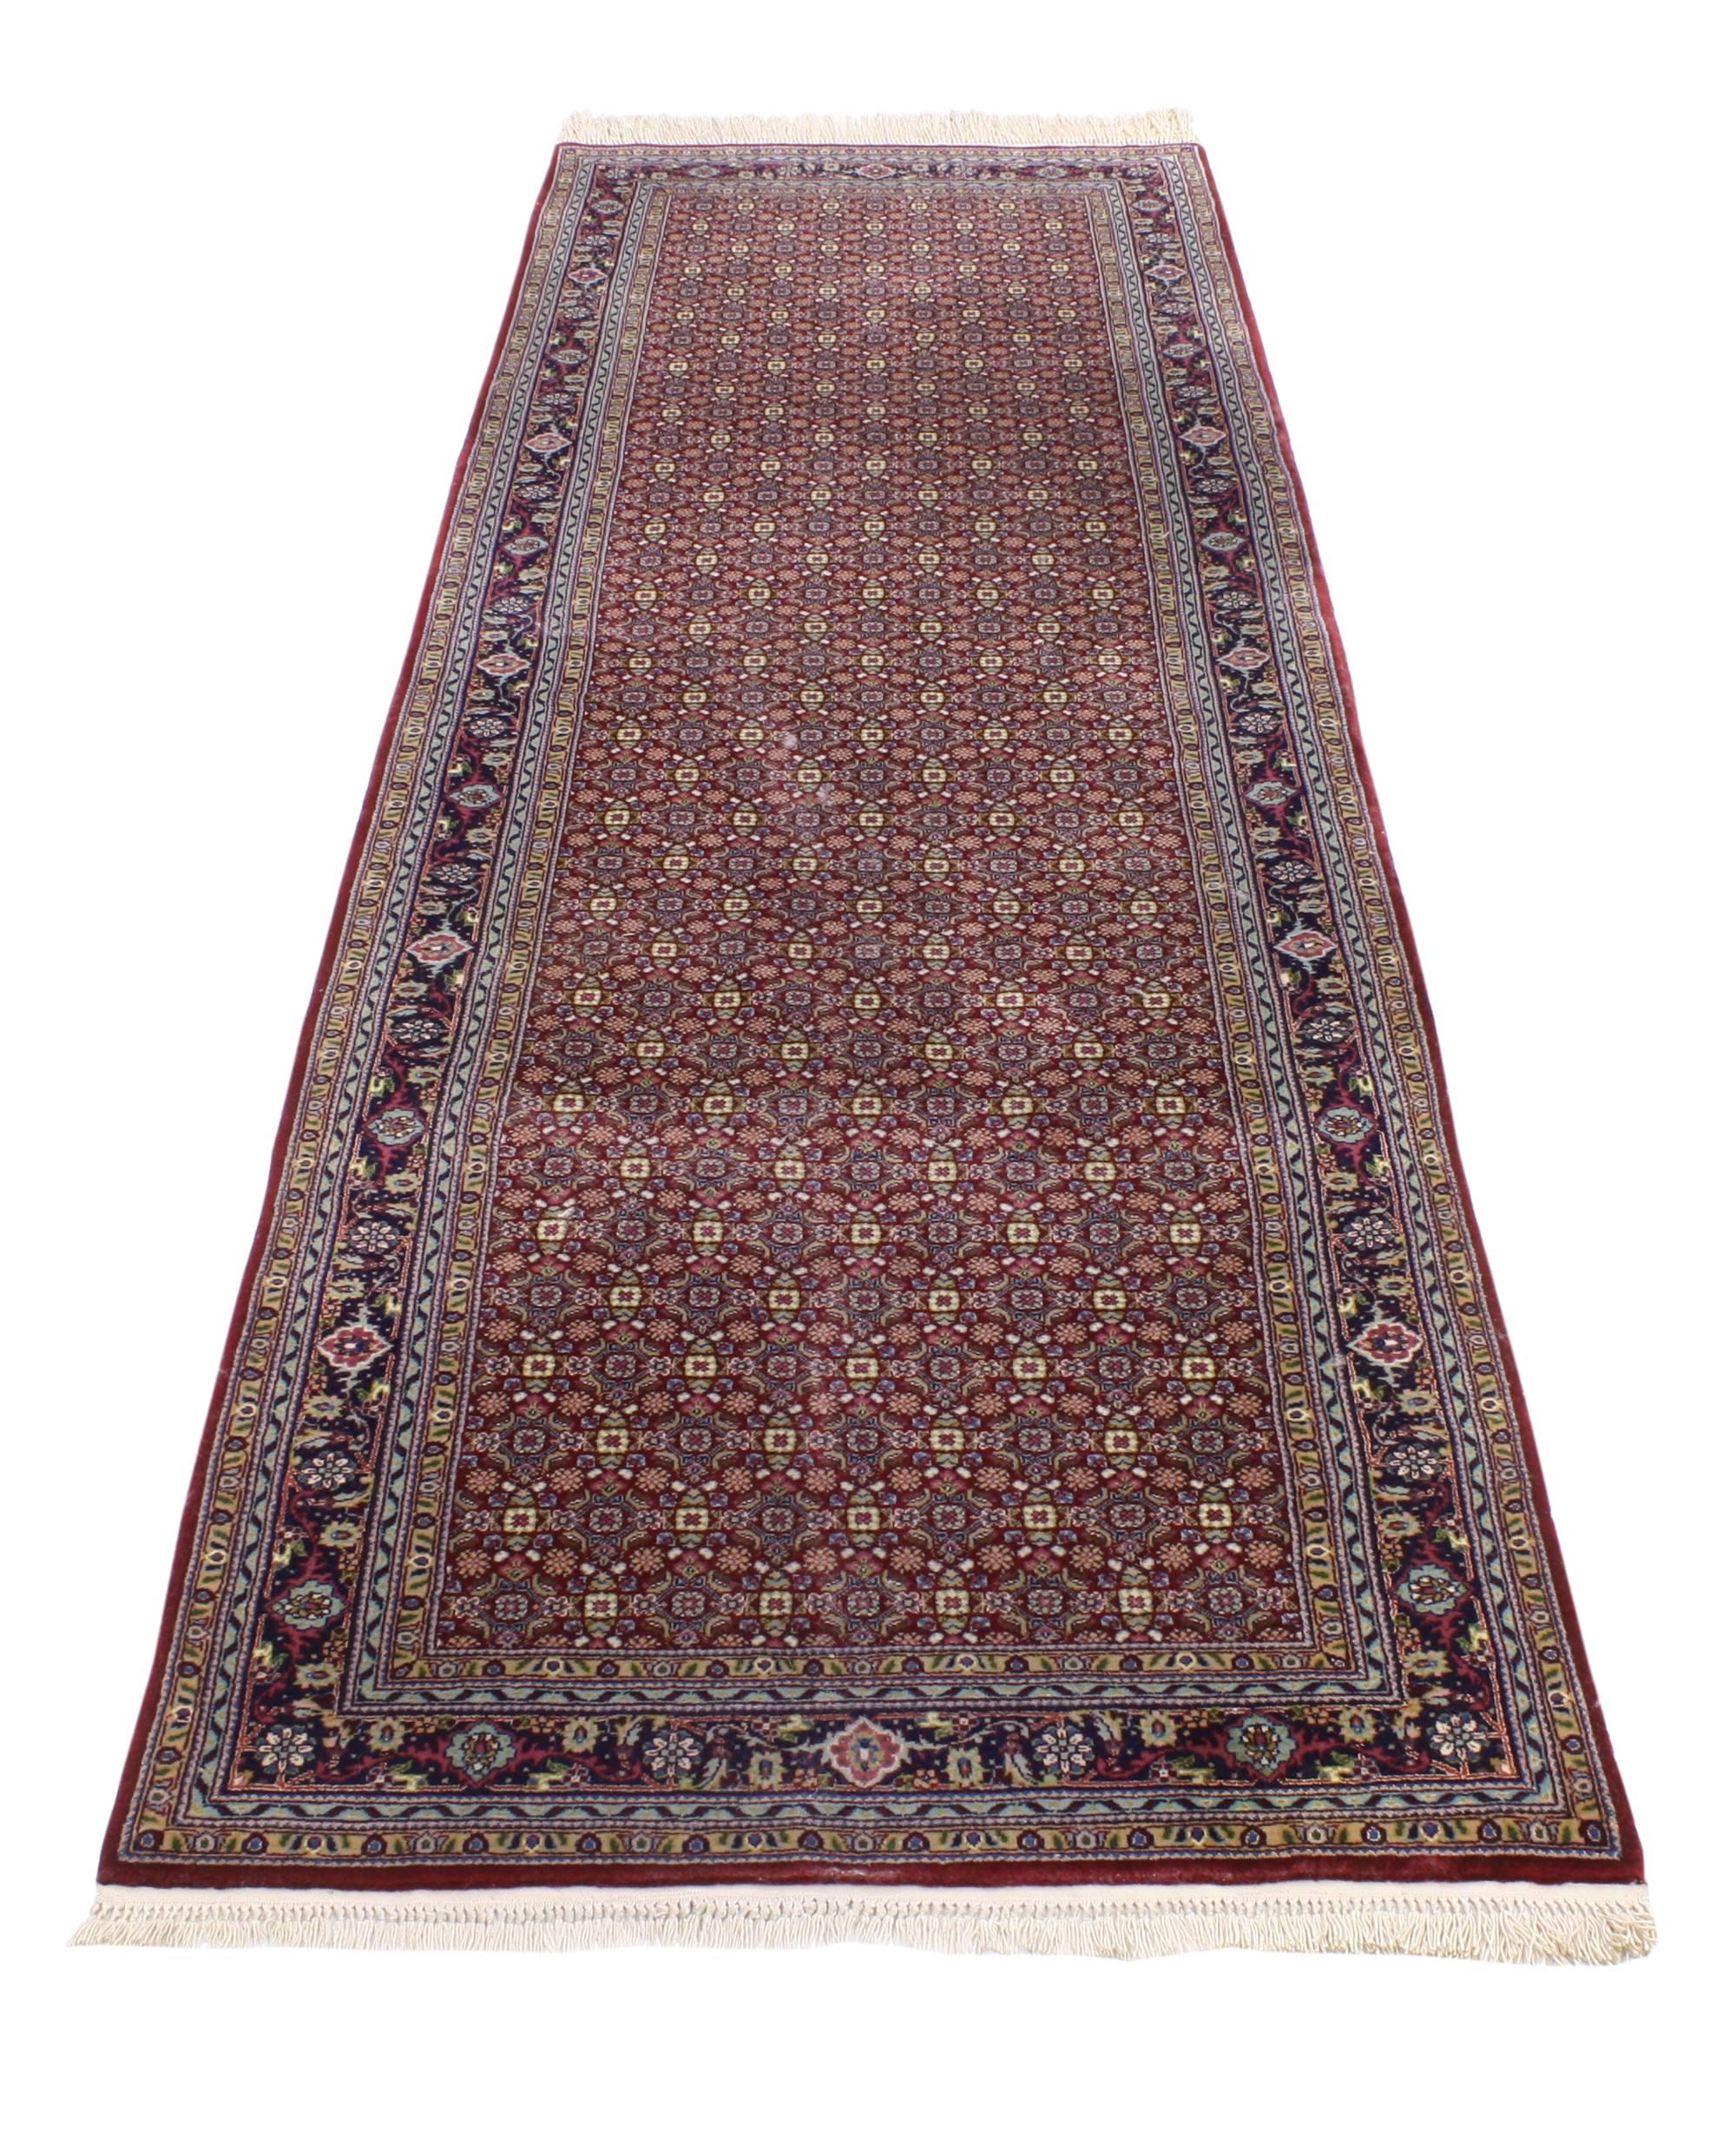 Chinese Vintage Persian Style Hallway Runner with Tabriz Design For Sale